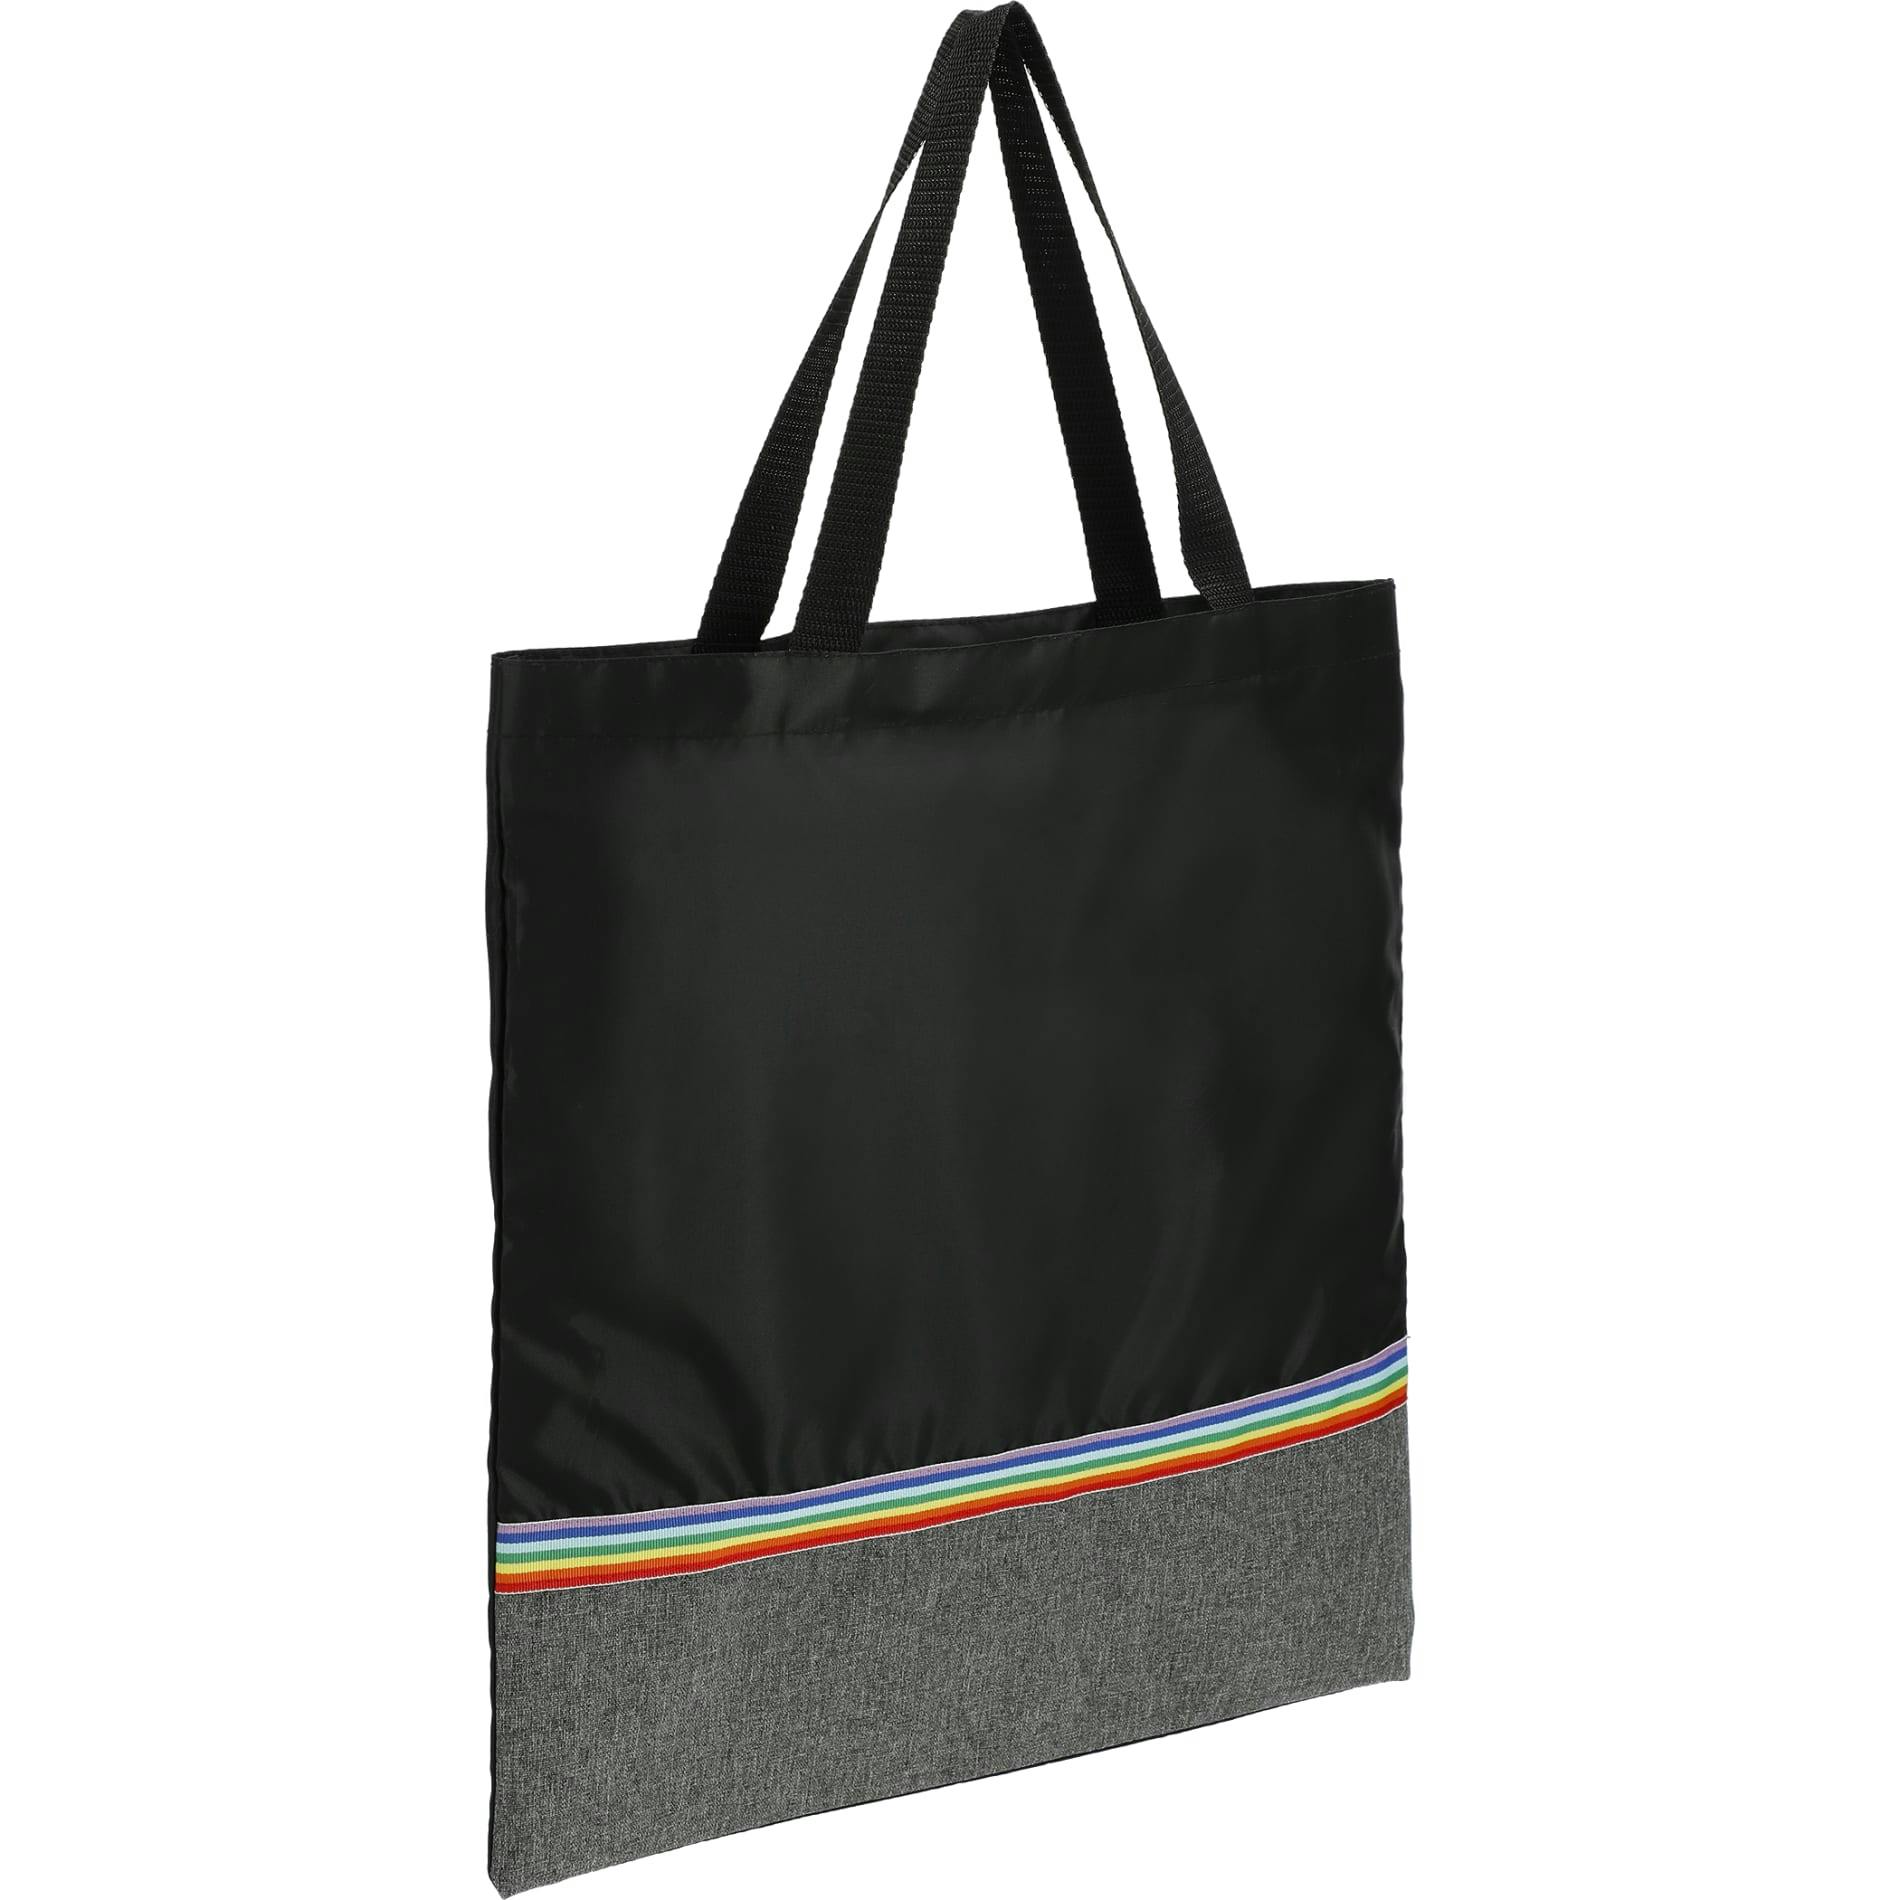 Rainbow RPET Convention Tote - additional Image 1